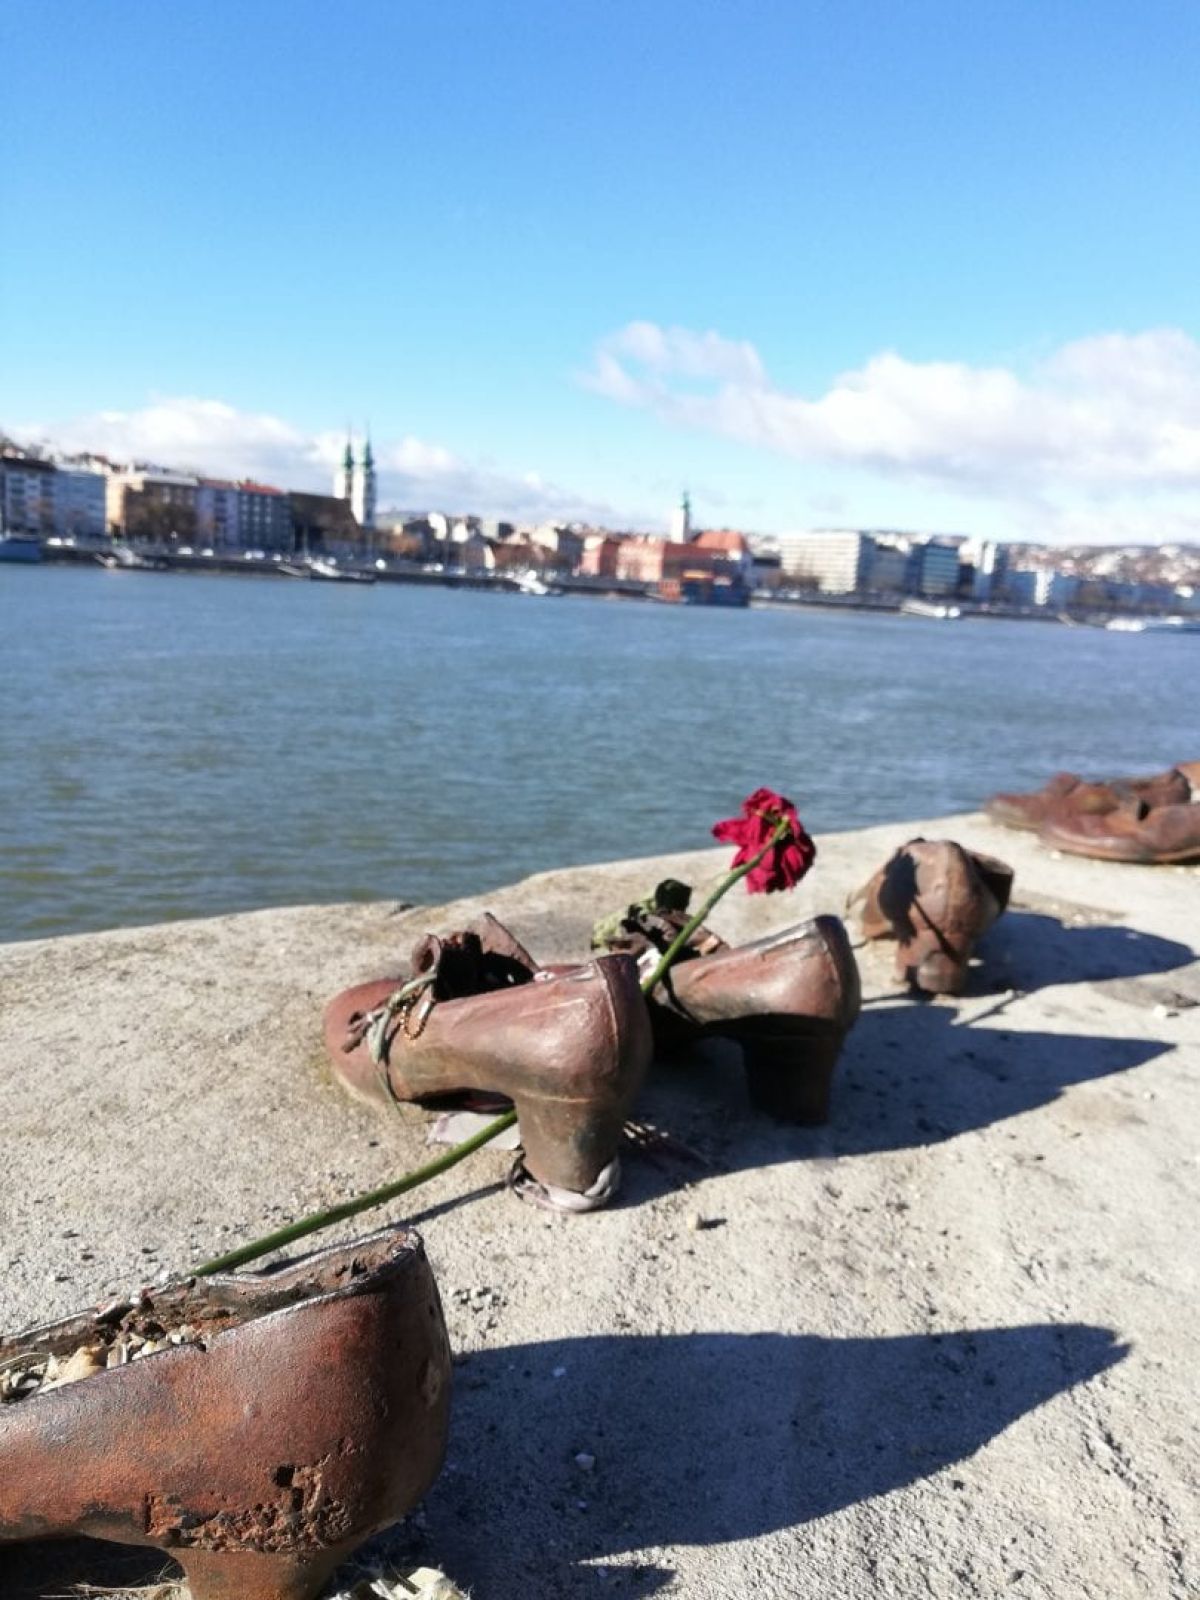 Artefact of the Week on tour: Shoes on the Danube Bank